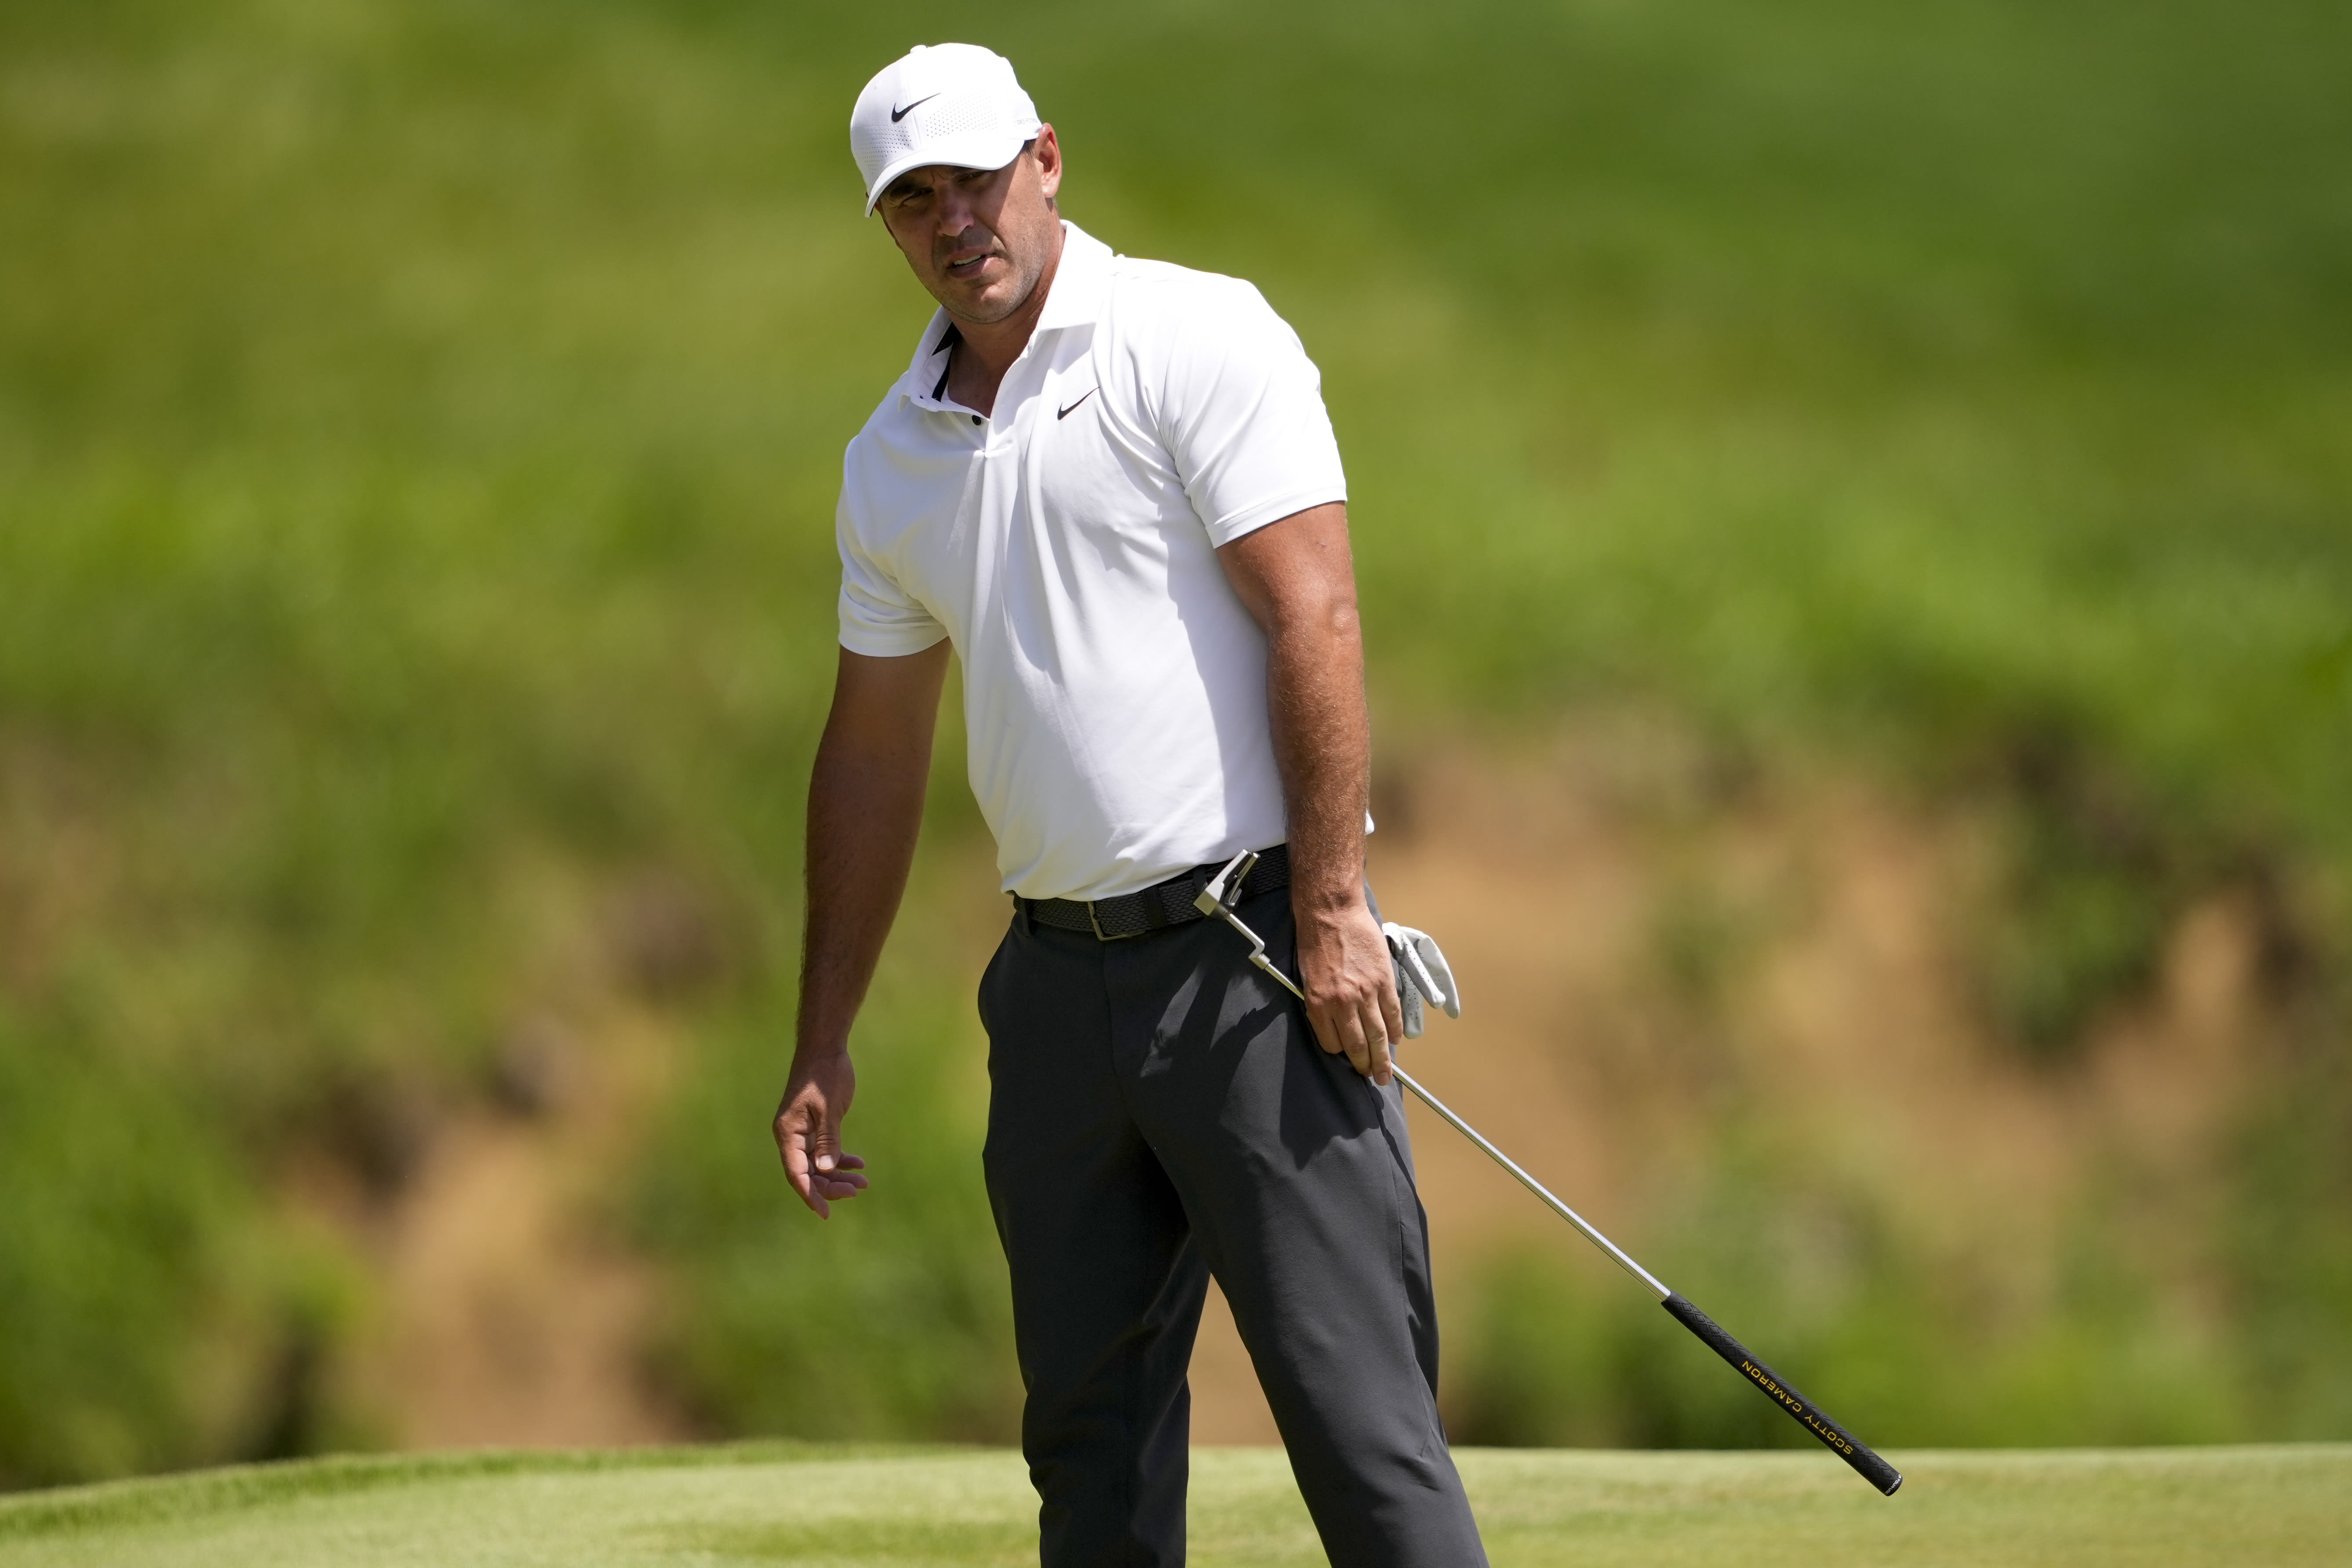 Dustin Johnson and Brooks Koepka showing early sign of major struggles